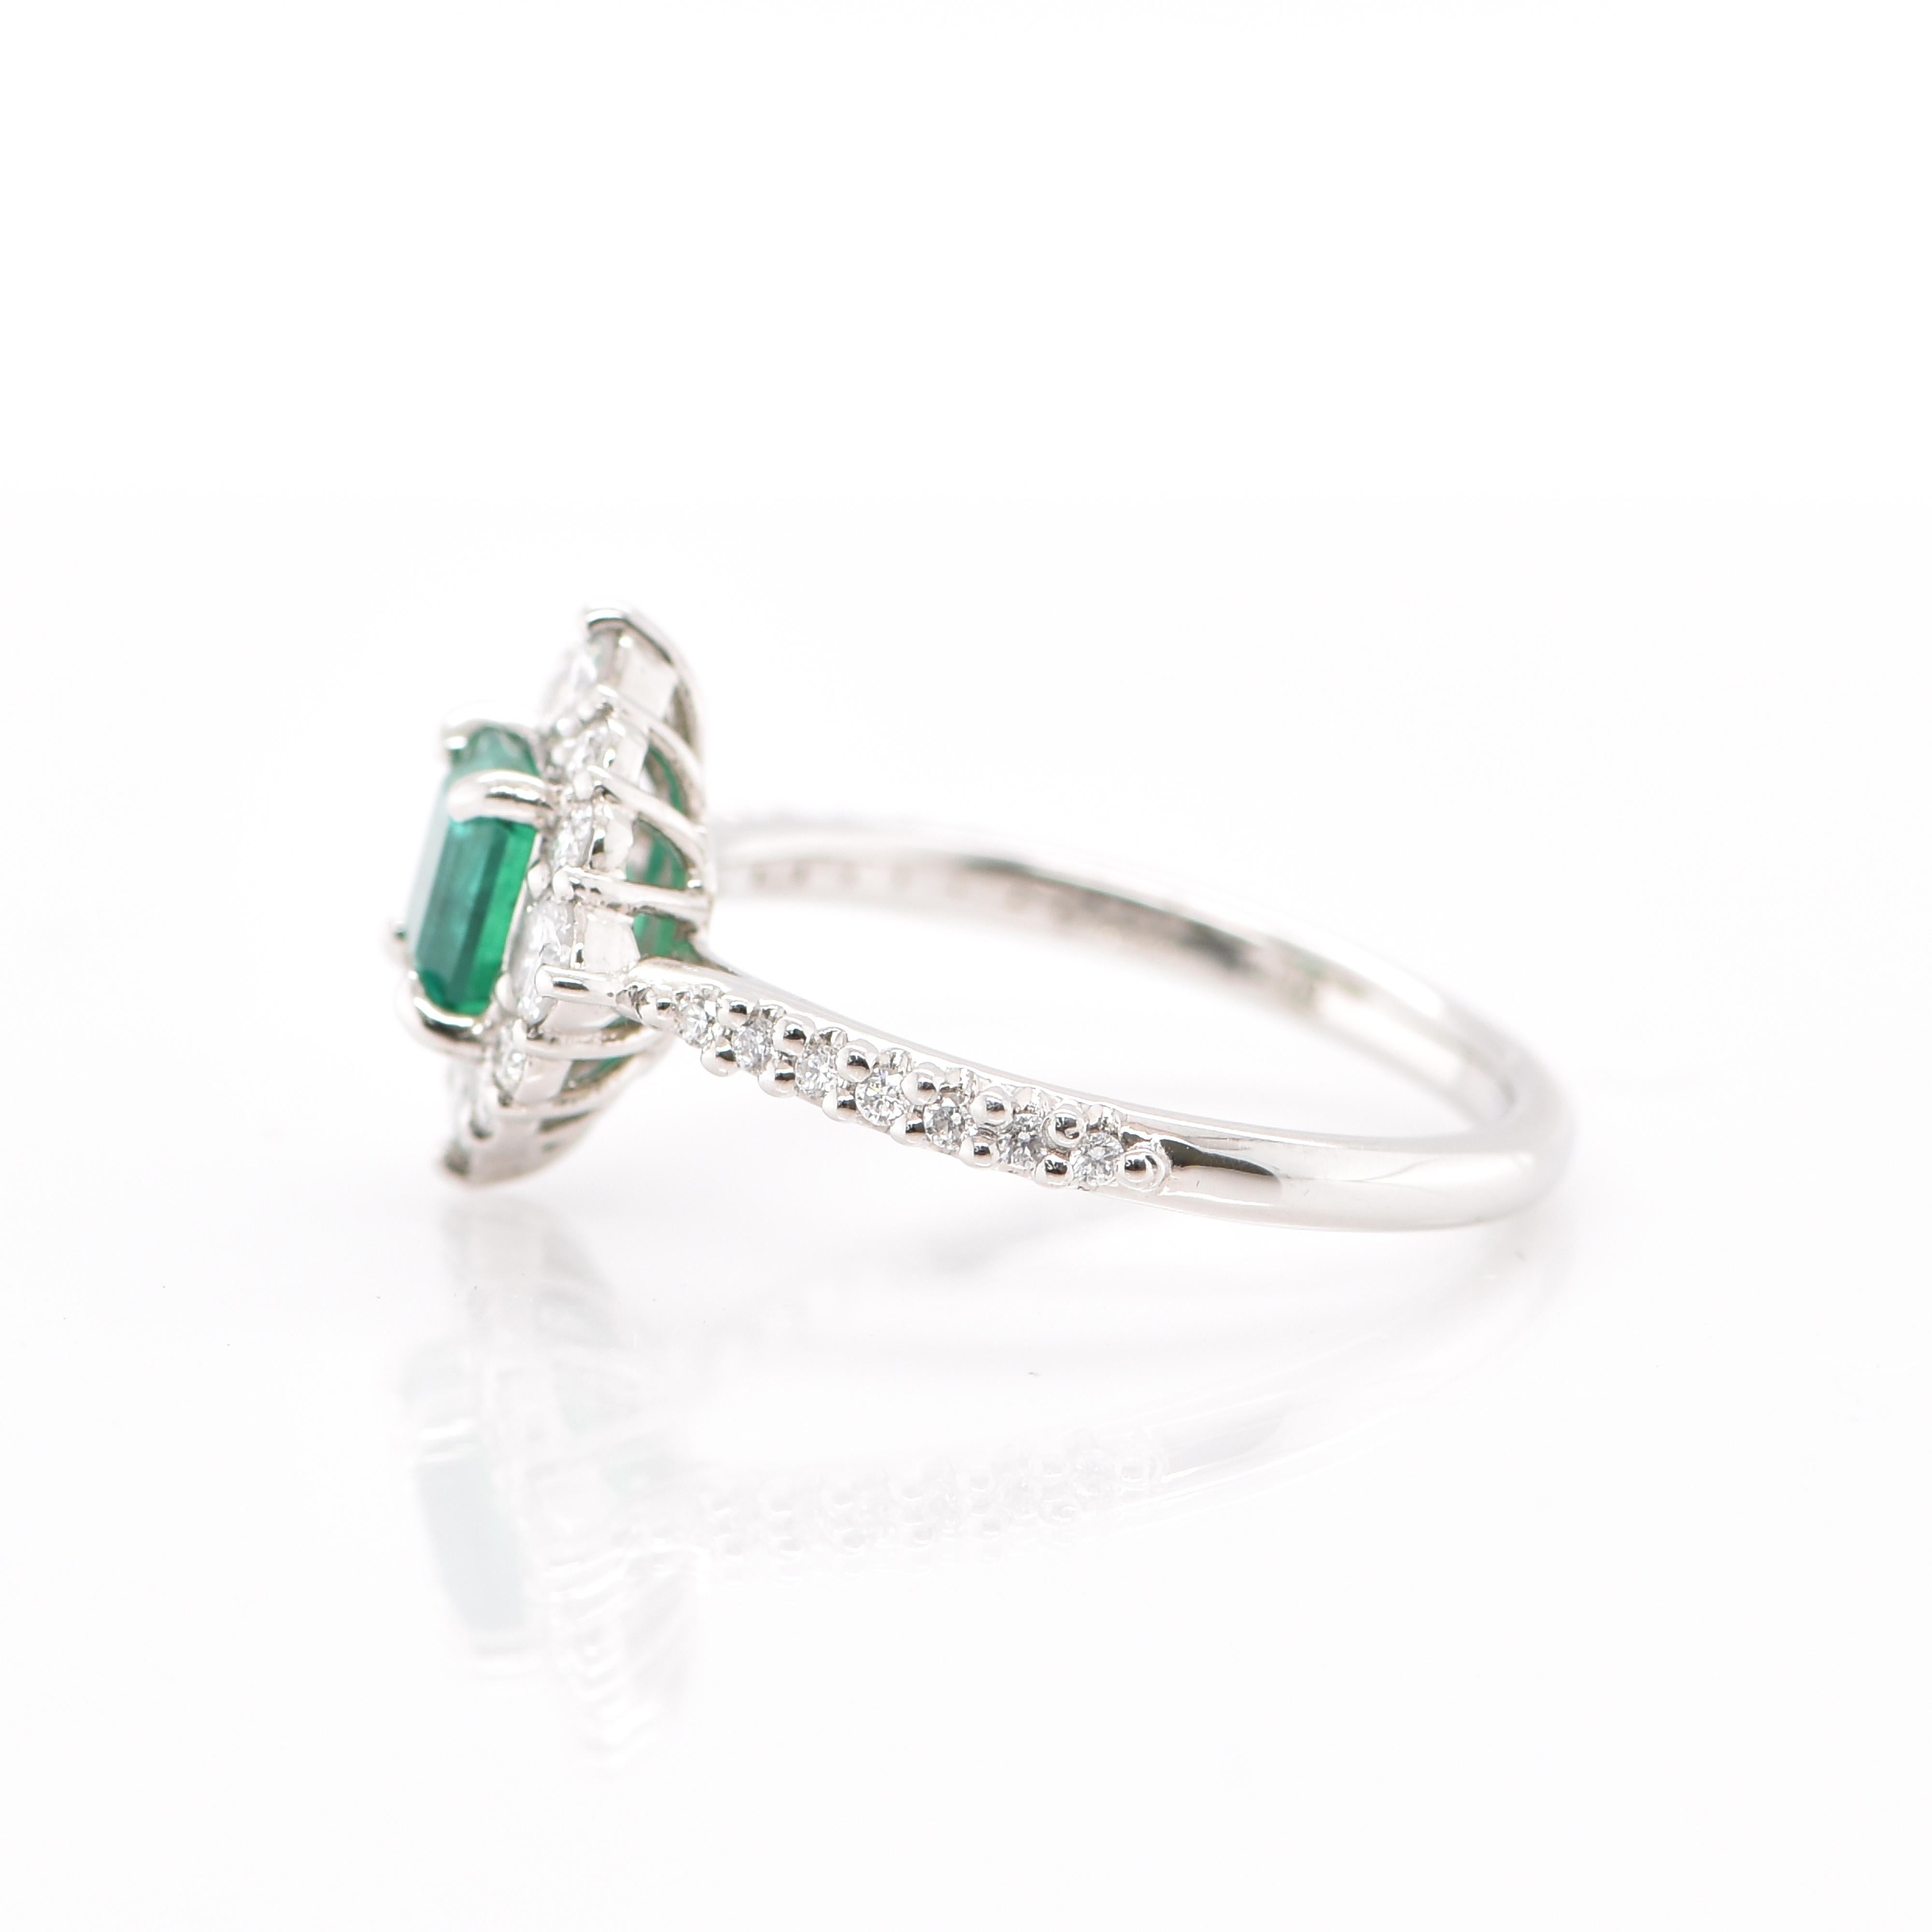 Emerald Cut 0.797 Carat Natural Emerald and Diamond Halo Ring Set in Platinum For Sale